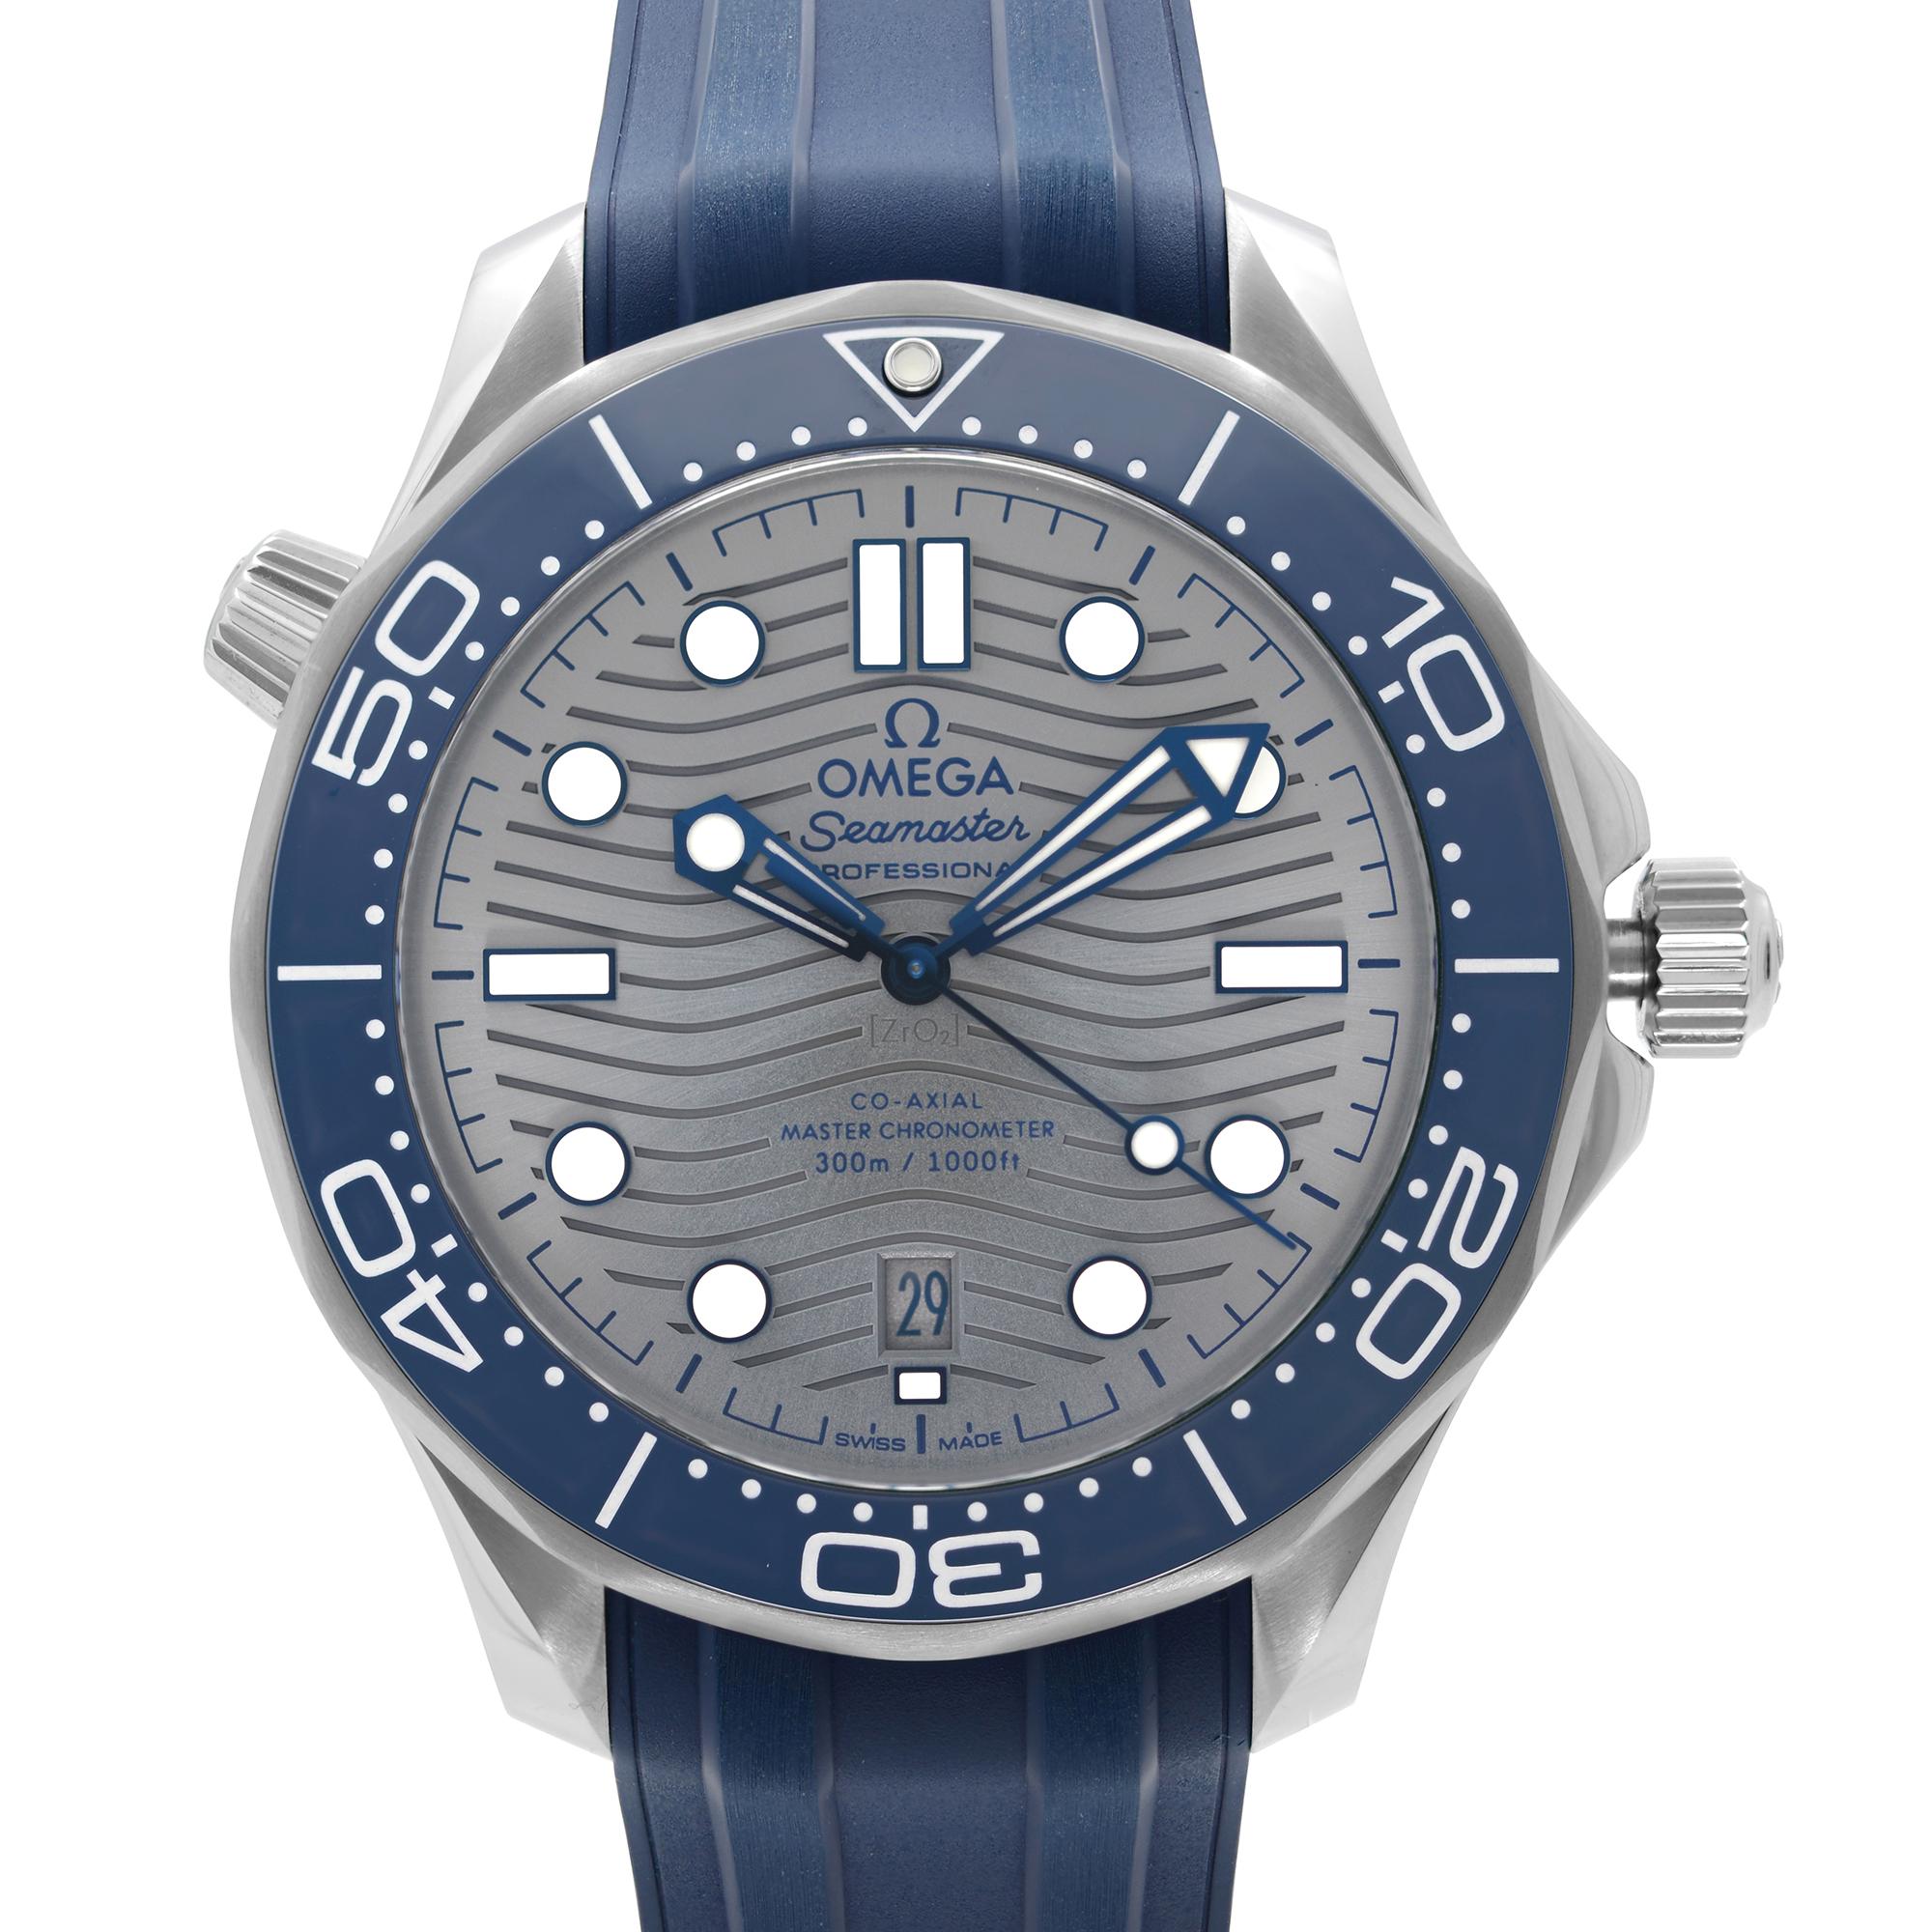 Omega Seamaster Diver 300M Steel Grey Wave Dial Men's Watch 210.32.42.20.06.001 This Beautiful Timepiece Features: Stainless Steel Case with a Blue Rubber Strap. Rotating Stainless Steel Bezel with a Blue Ceramic ( Count-up Elapsed Time) Top Ring.